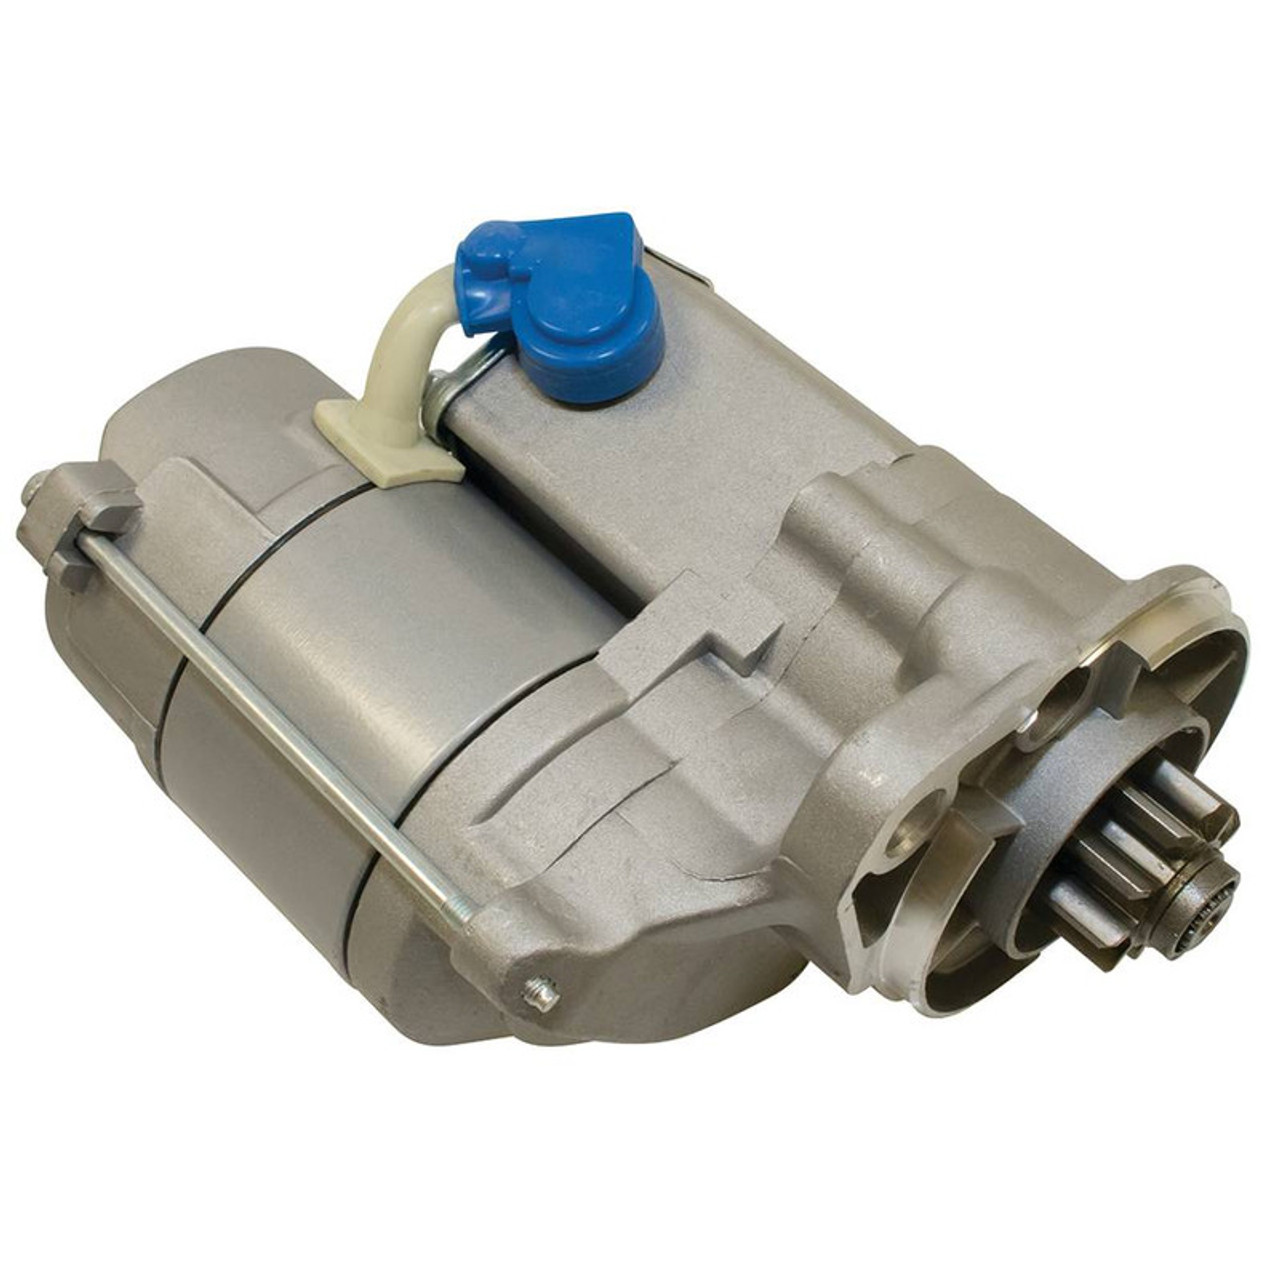 Electric Starter for Denso 028000-4200, 028000-4201, 028000-4990, 028000-4991, 028000-6240, 028000-6260, 028000-6261, 128000-0170, 128000-0171, 128000-018, 128000-0180, 128000-0181, 128000-6640, 228000-1020, 228000-1021, 228000-1022